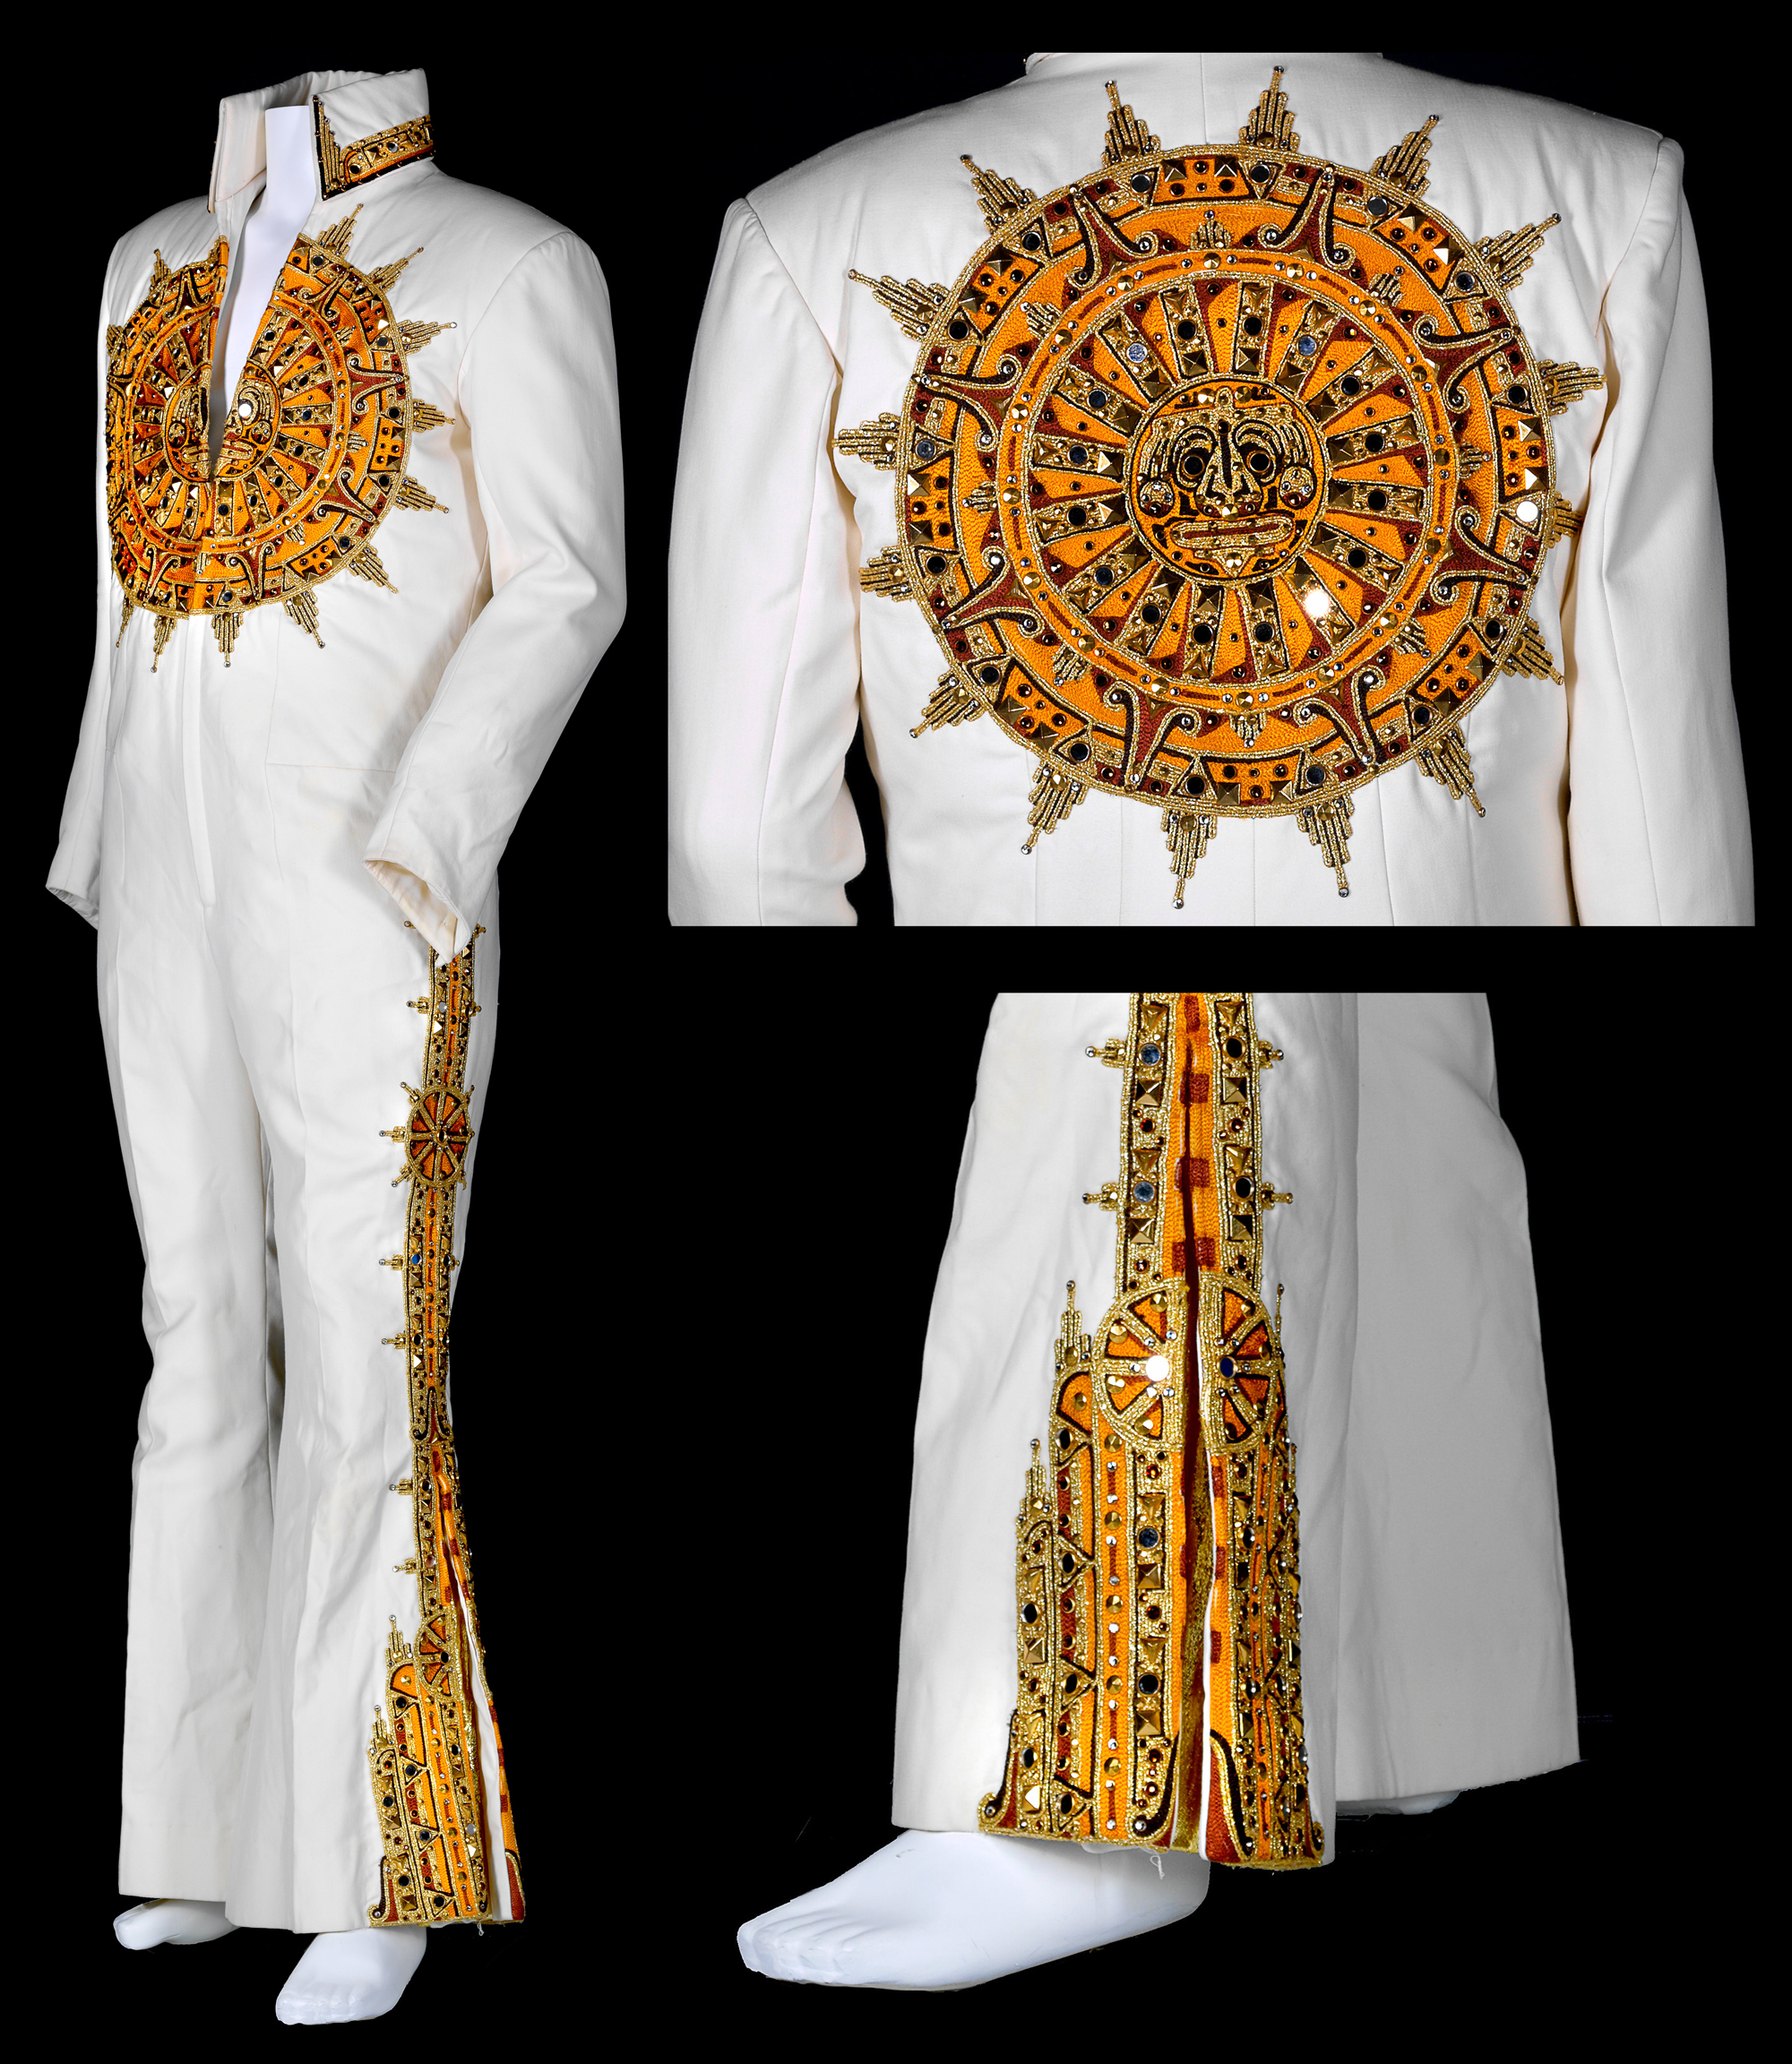 A white jumpsuit with Aztec-style embroidered detail in the shape of a sun on the front and back. There is also detail on the outside pants leg.